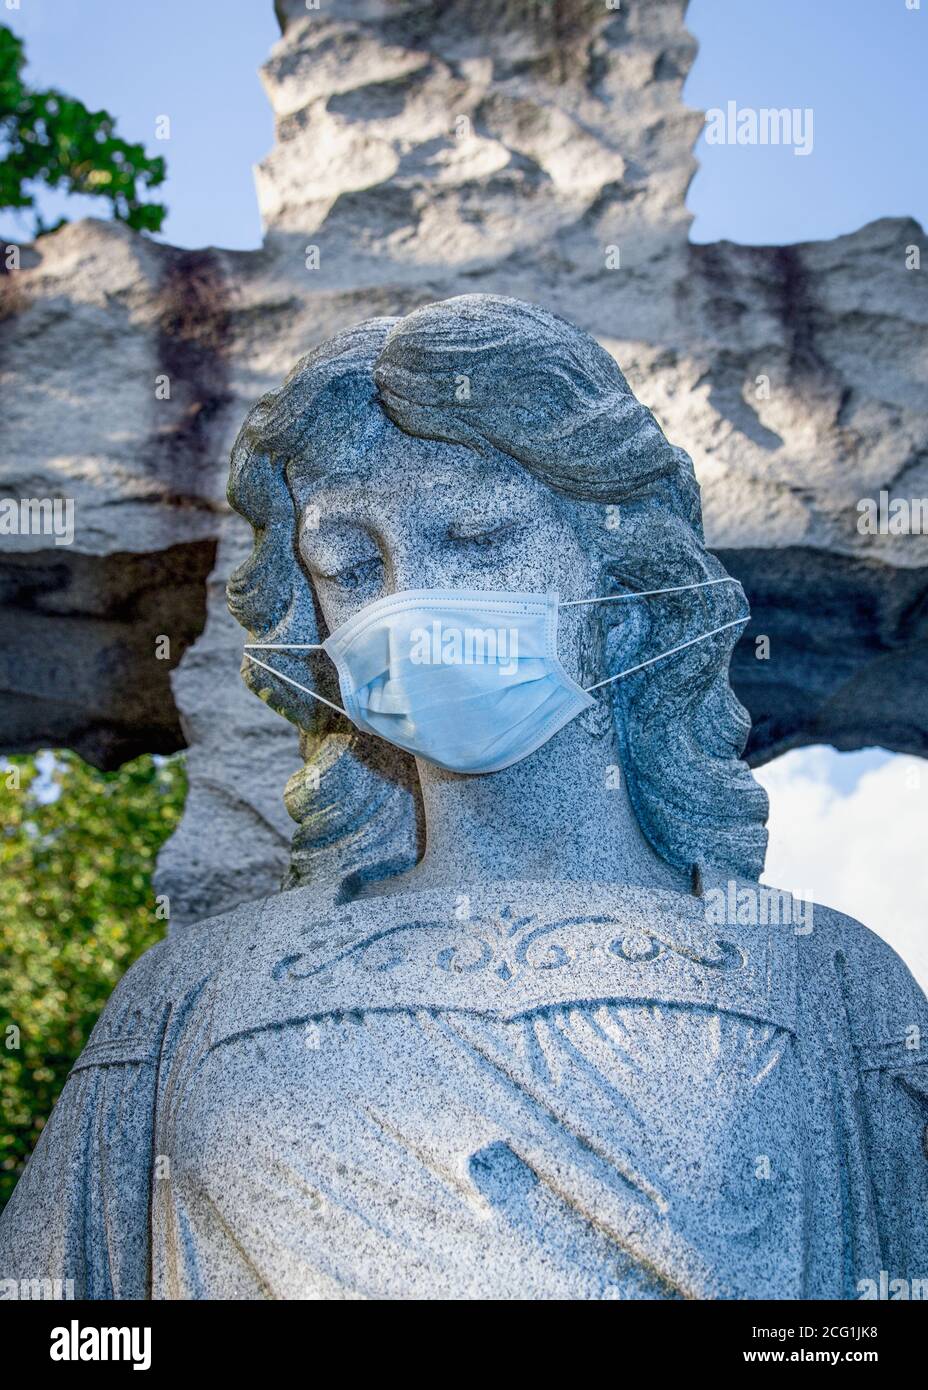 Close-up view of a cemetery angel statue wearing a surgical face-mask Stock Photo